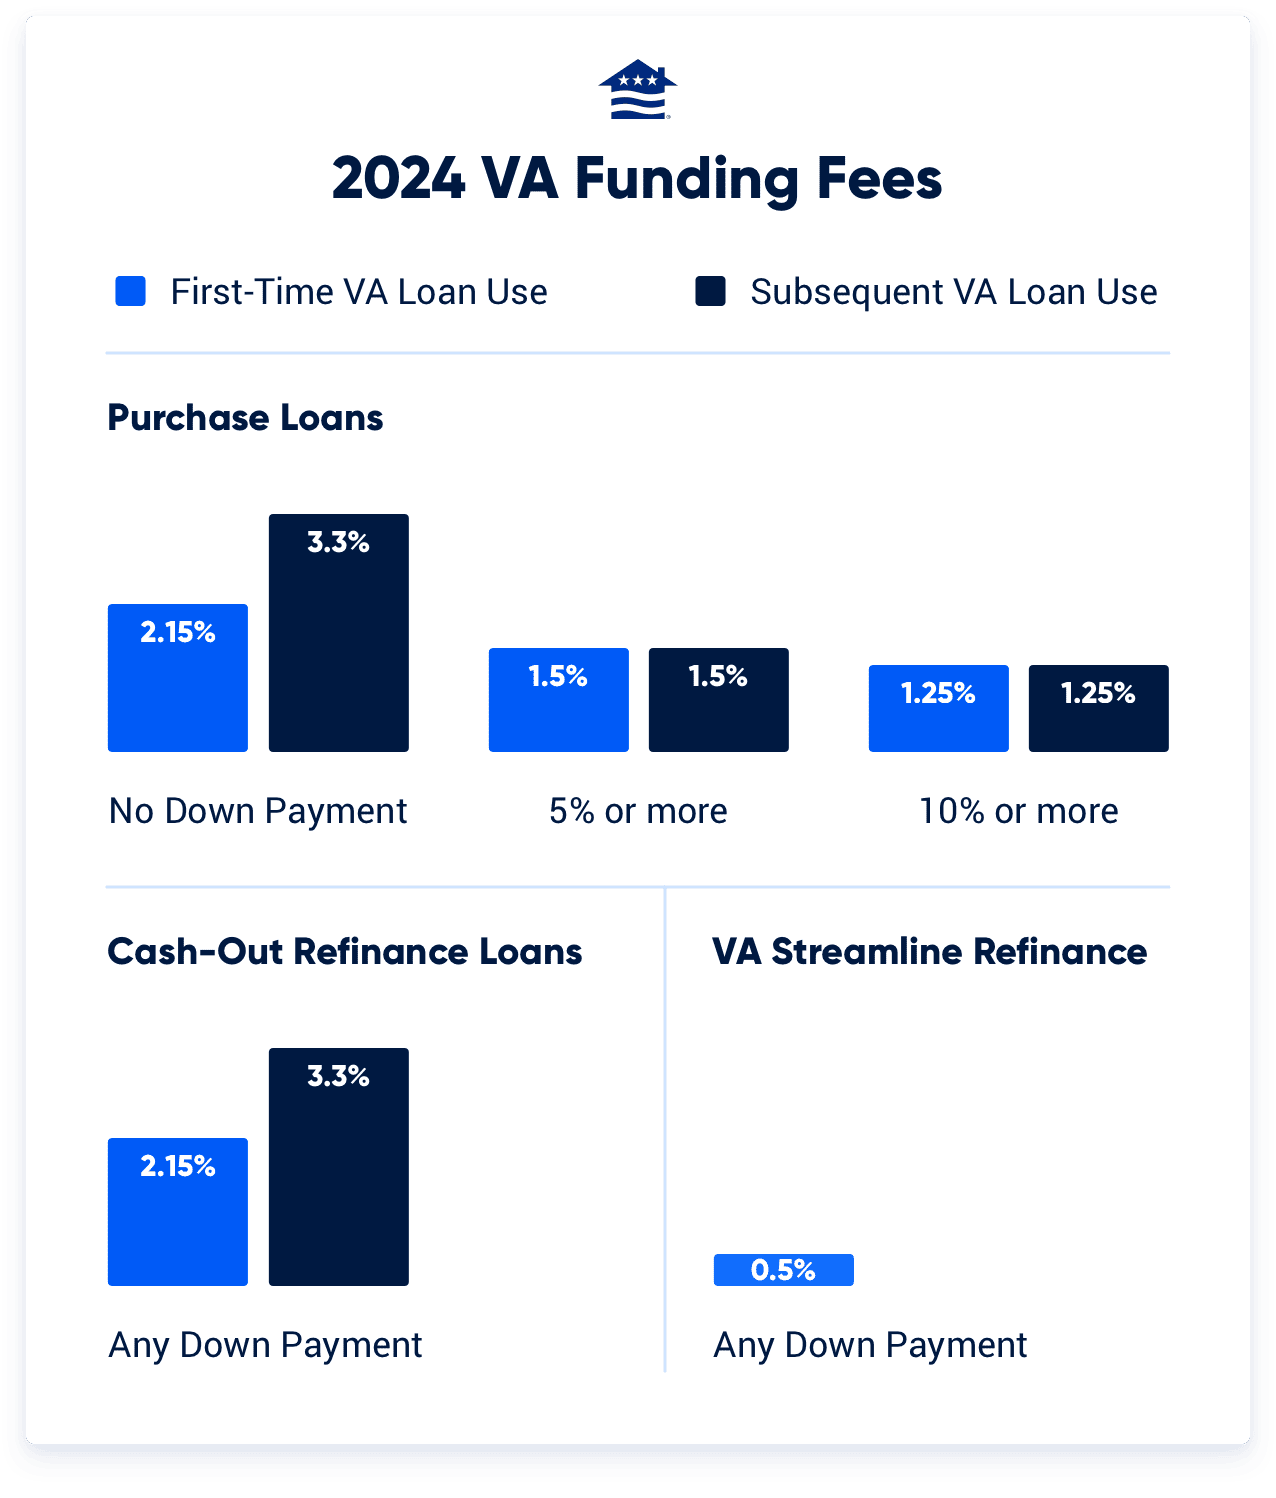 VA Funding Fee 2024 Charts and Exemptions